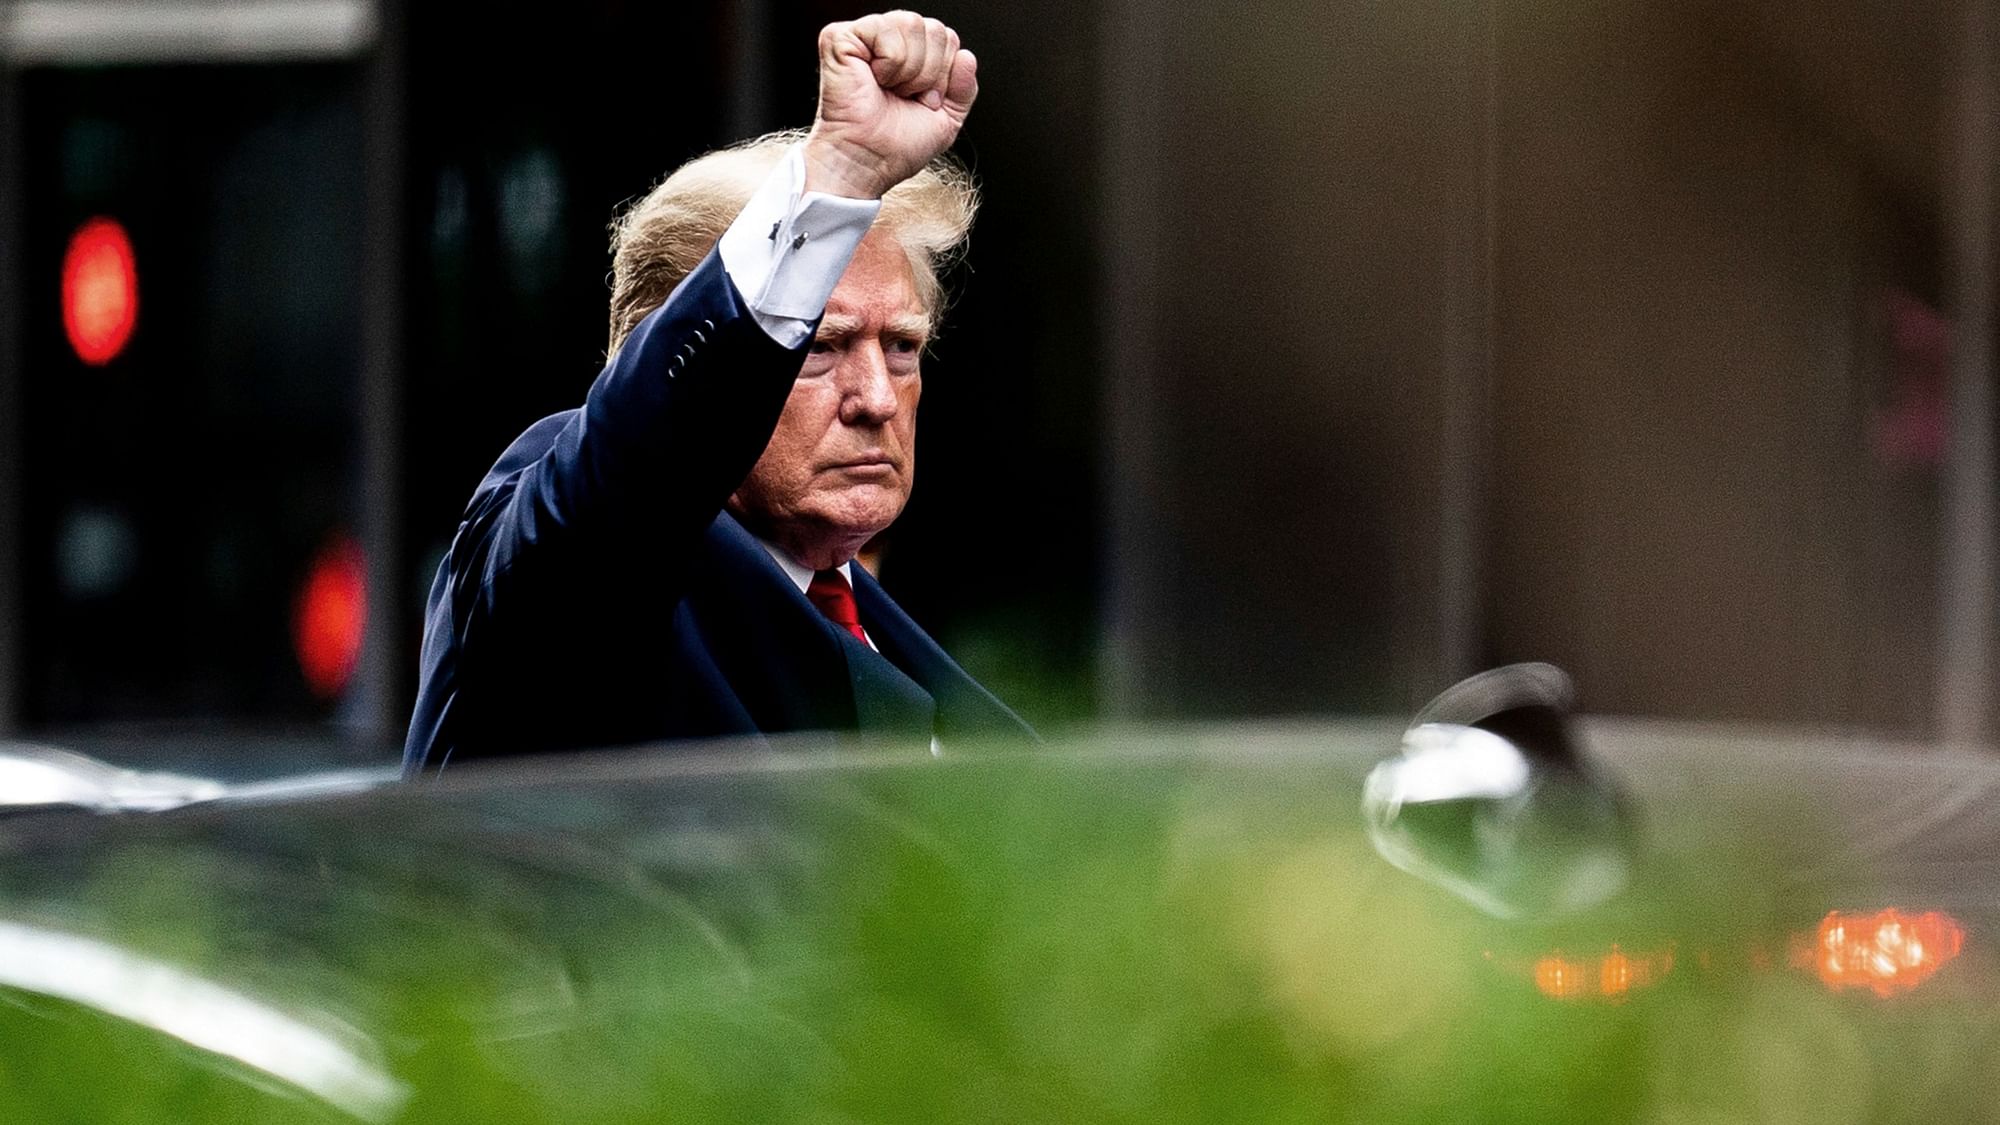 <div class="paragraphs"><p>Former President Donald Trump gestures as he departs Trump Tower, Wednesday, 10 August 2022, in New York, on his way to the New York attorney general's office for a deposition in a civil investigation. </p></div>